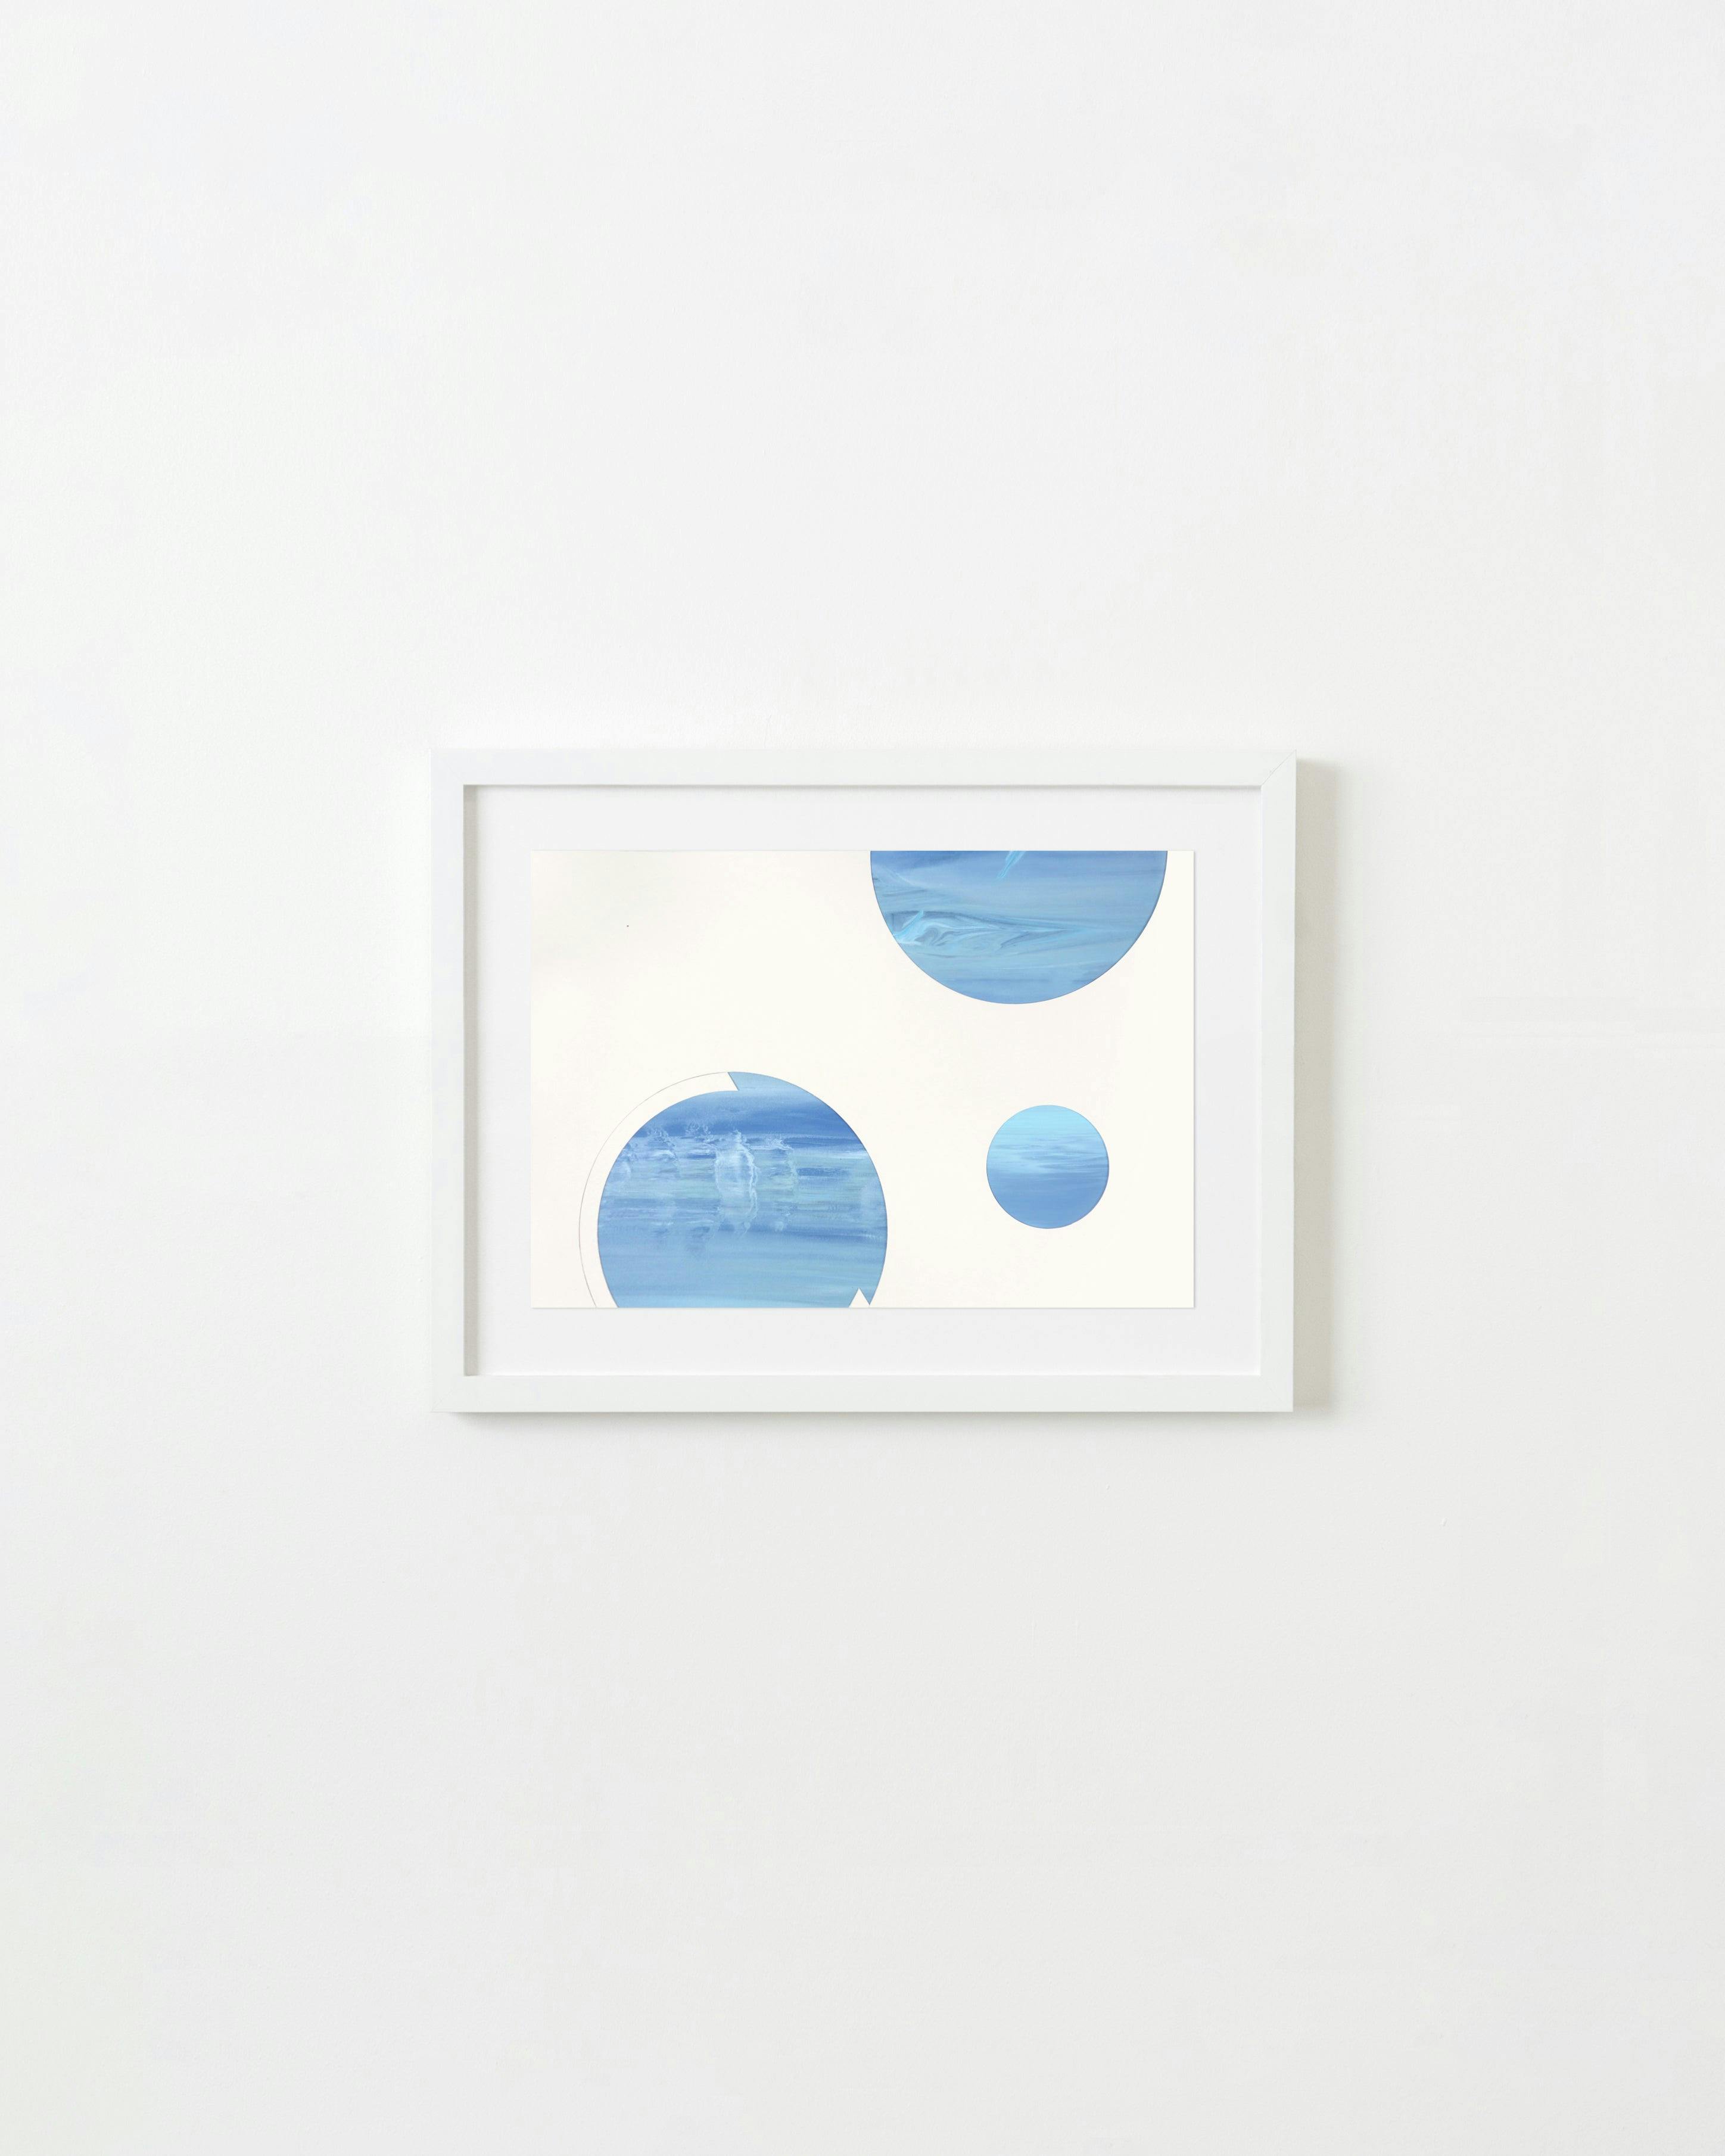 Print by Alyson Provax titled "Diagram 79".